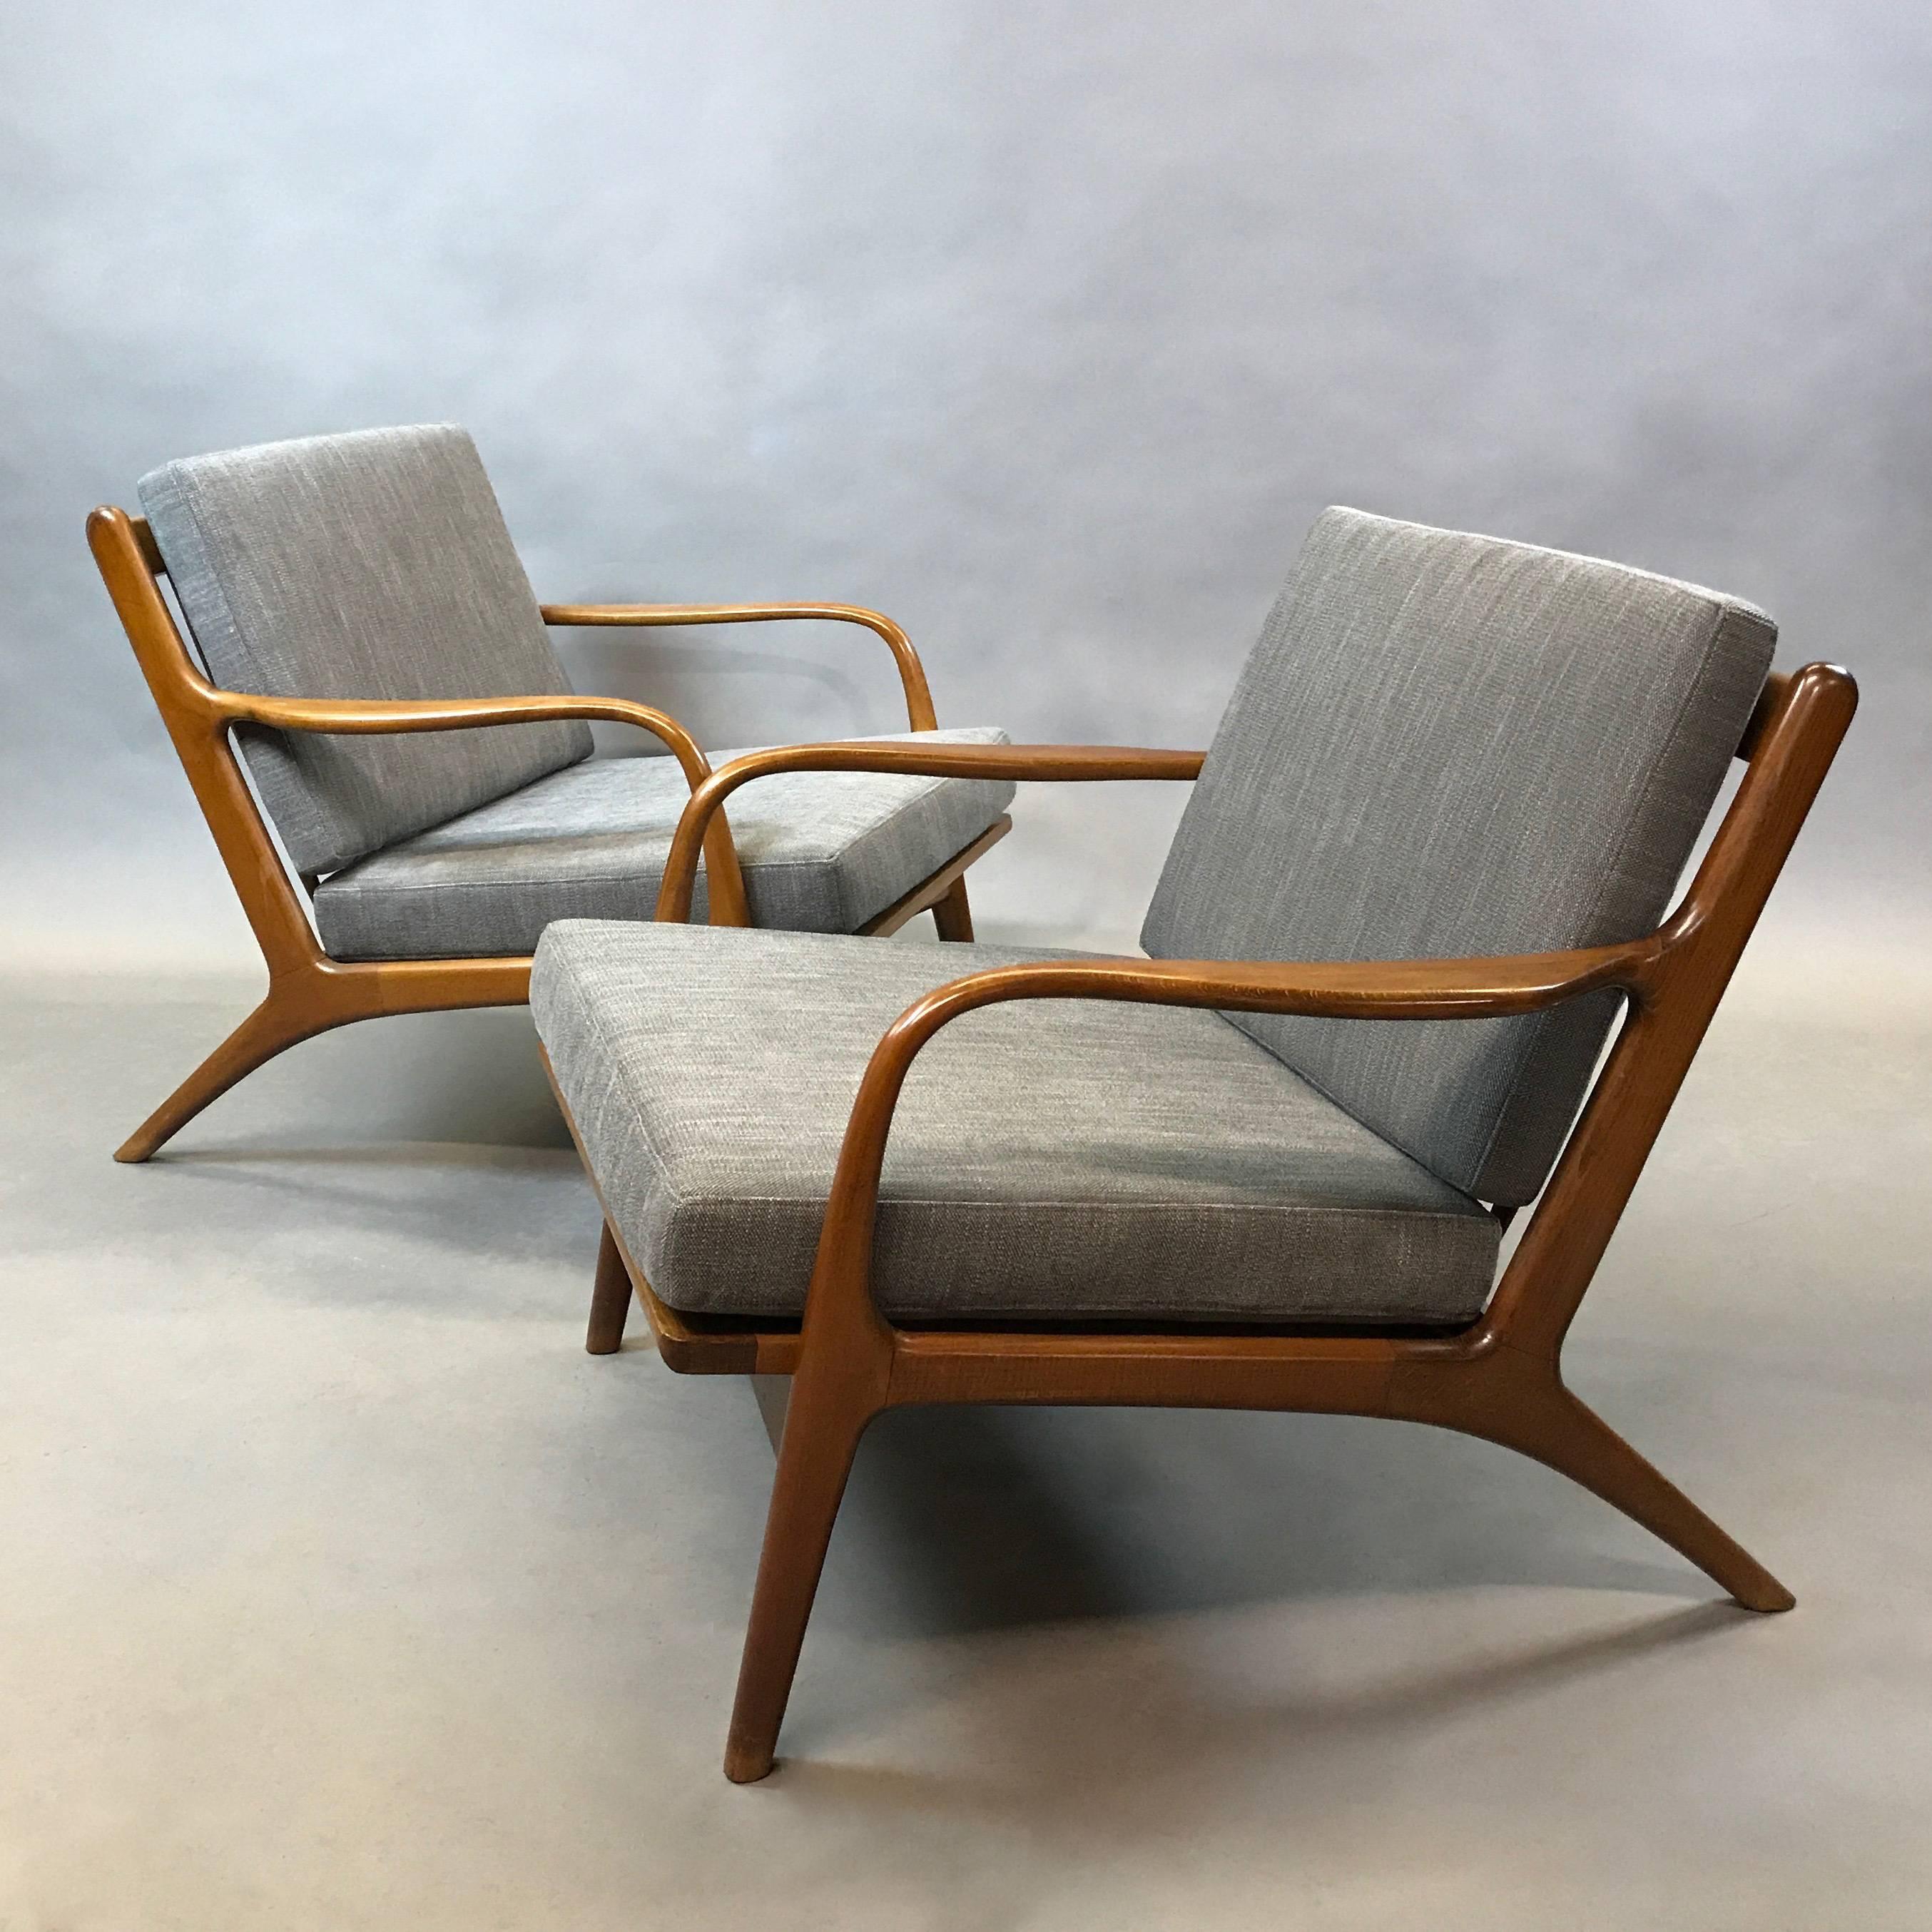 Pair of American, Model 2315-c, lounge chairs designed by Adrian Pearsall for Craft Associates feature sculptural, maple frames with newly upholstered seats and backs in medium gray chenille fabric.